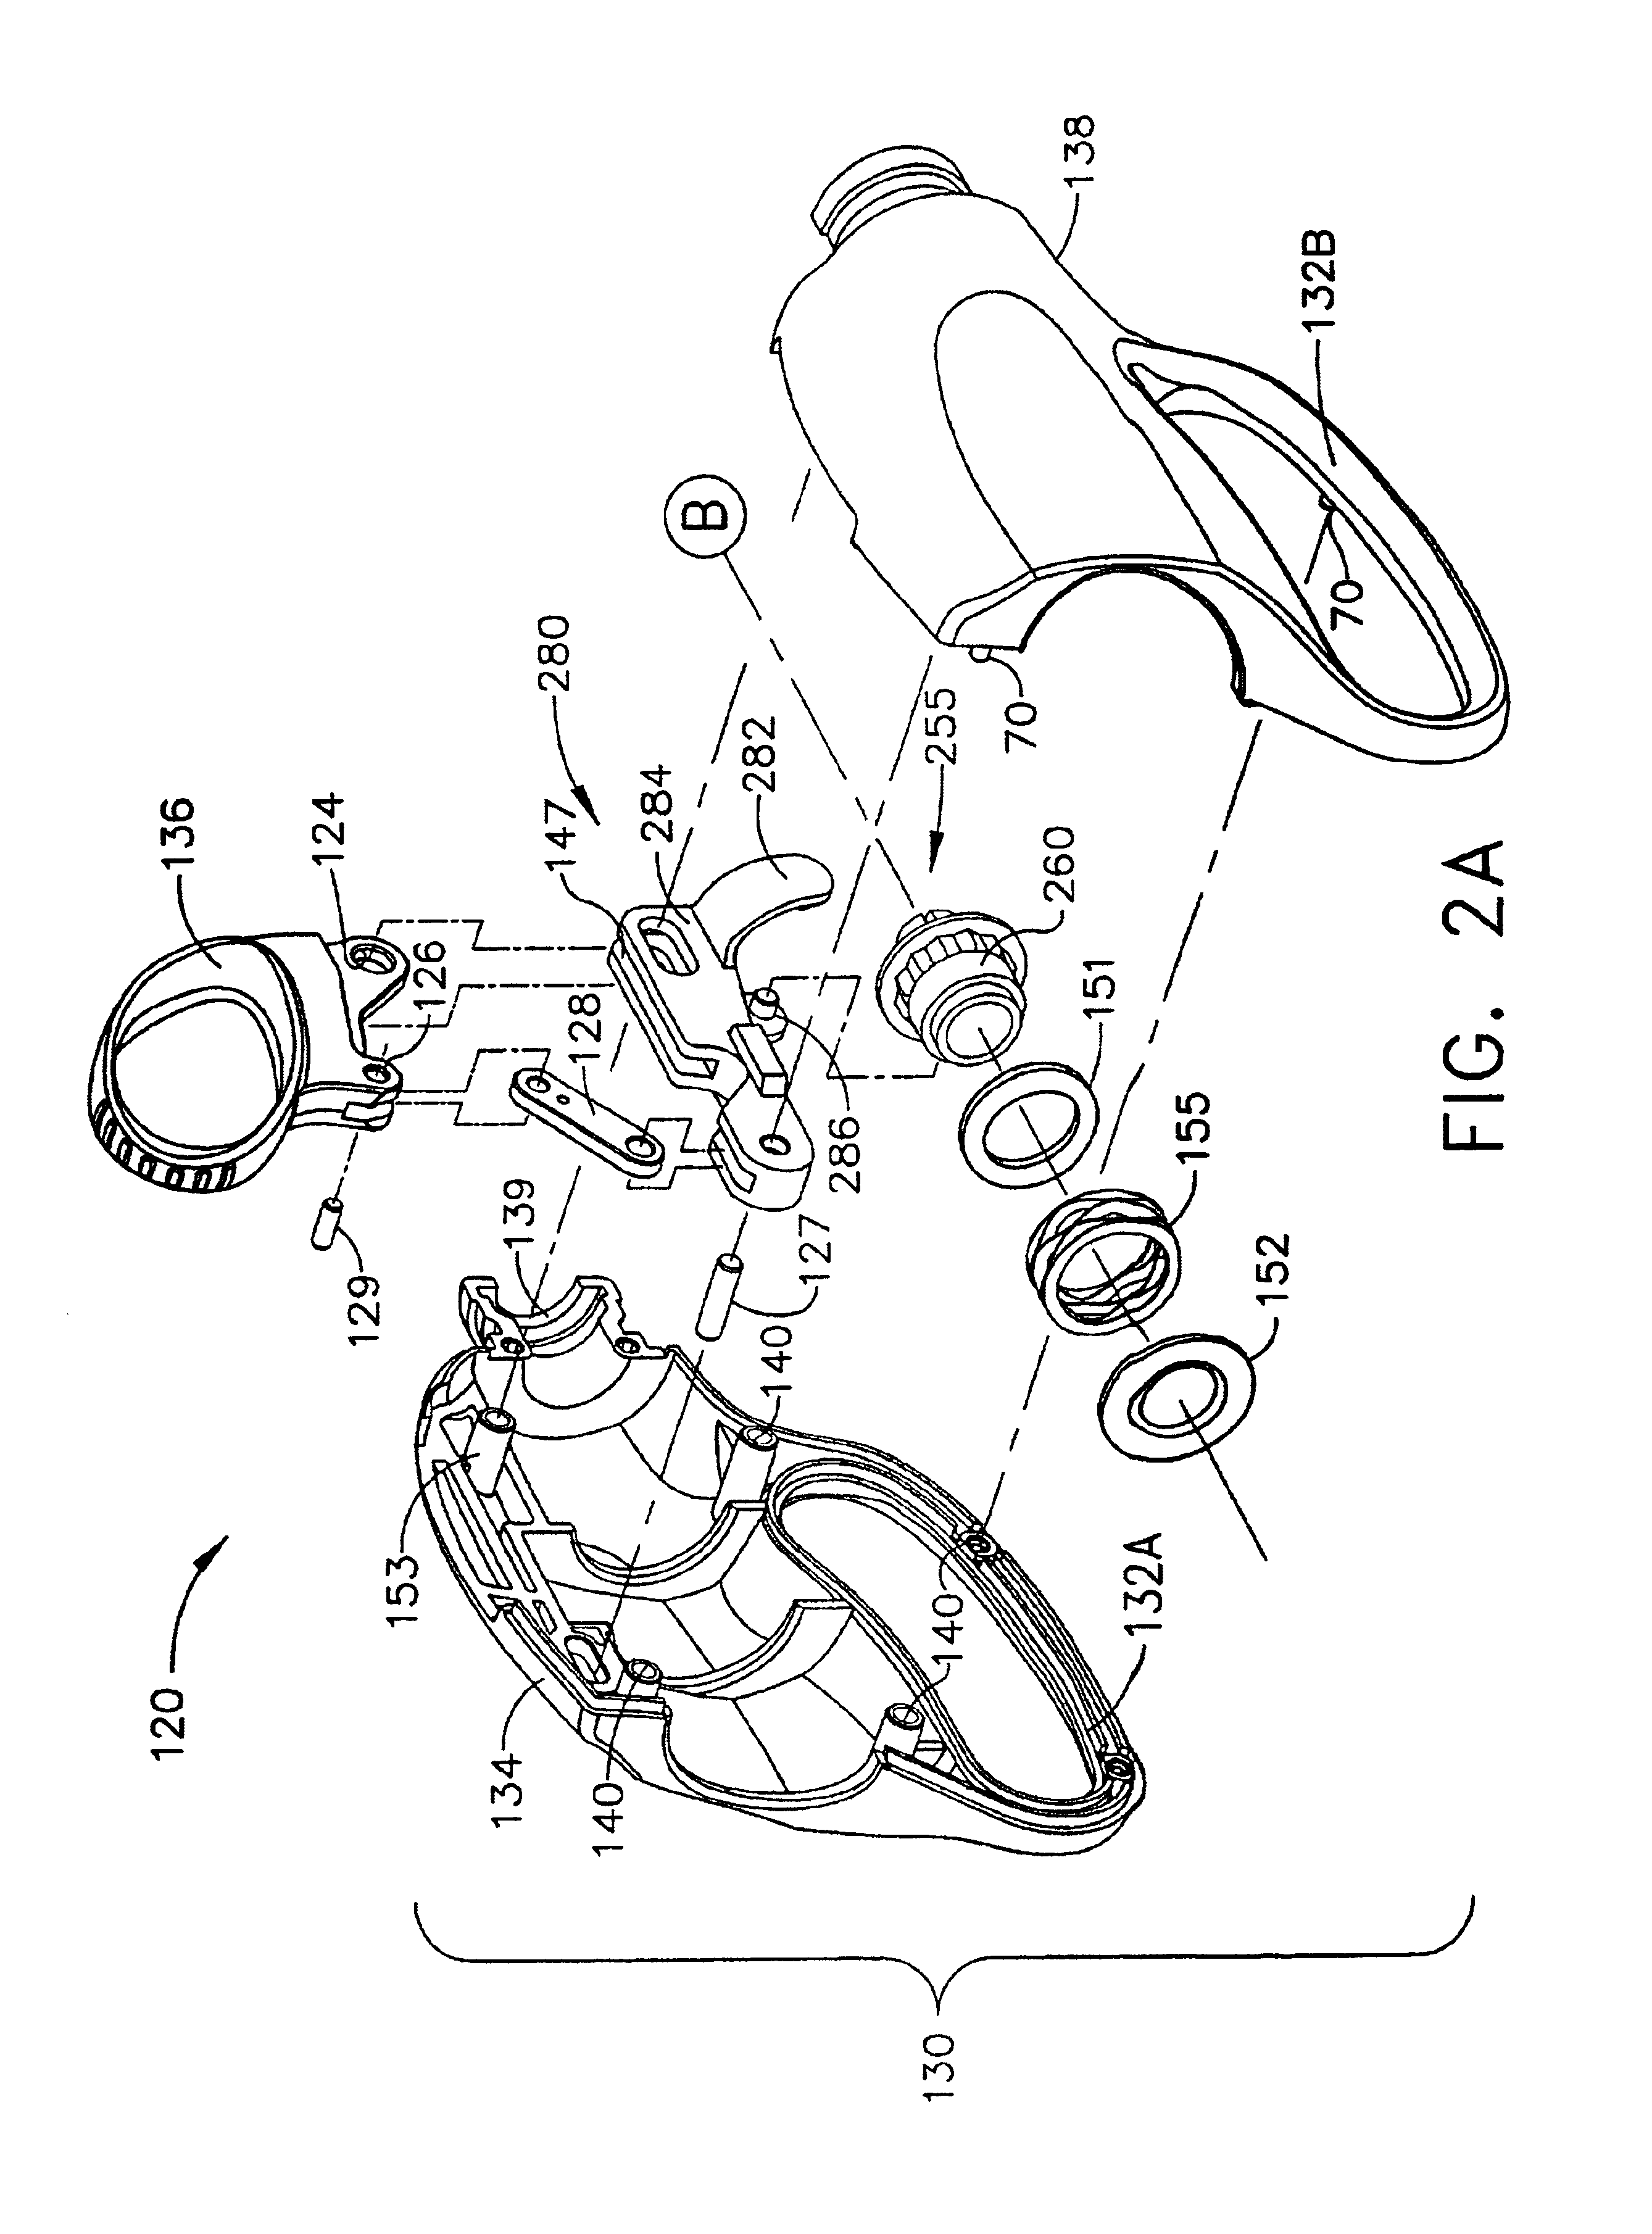 Blades with functional balance asymmetries for use with ultrasonic surgical instruments